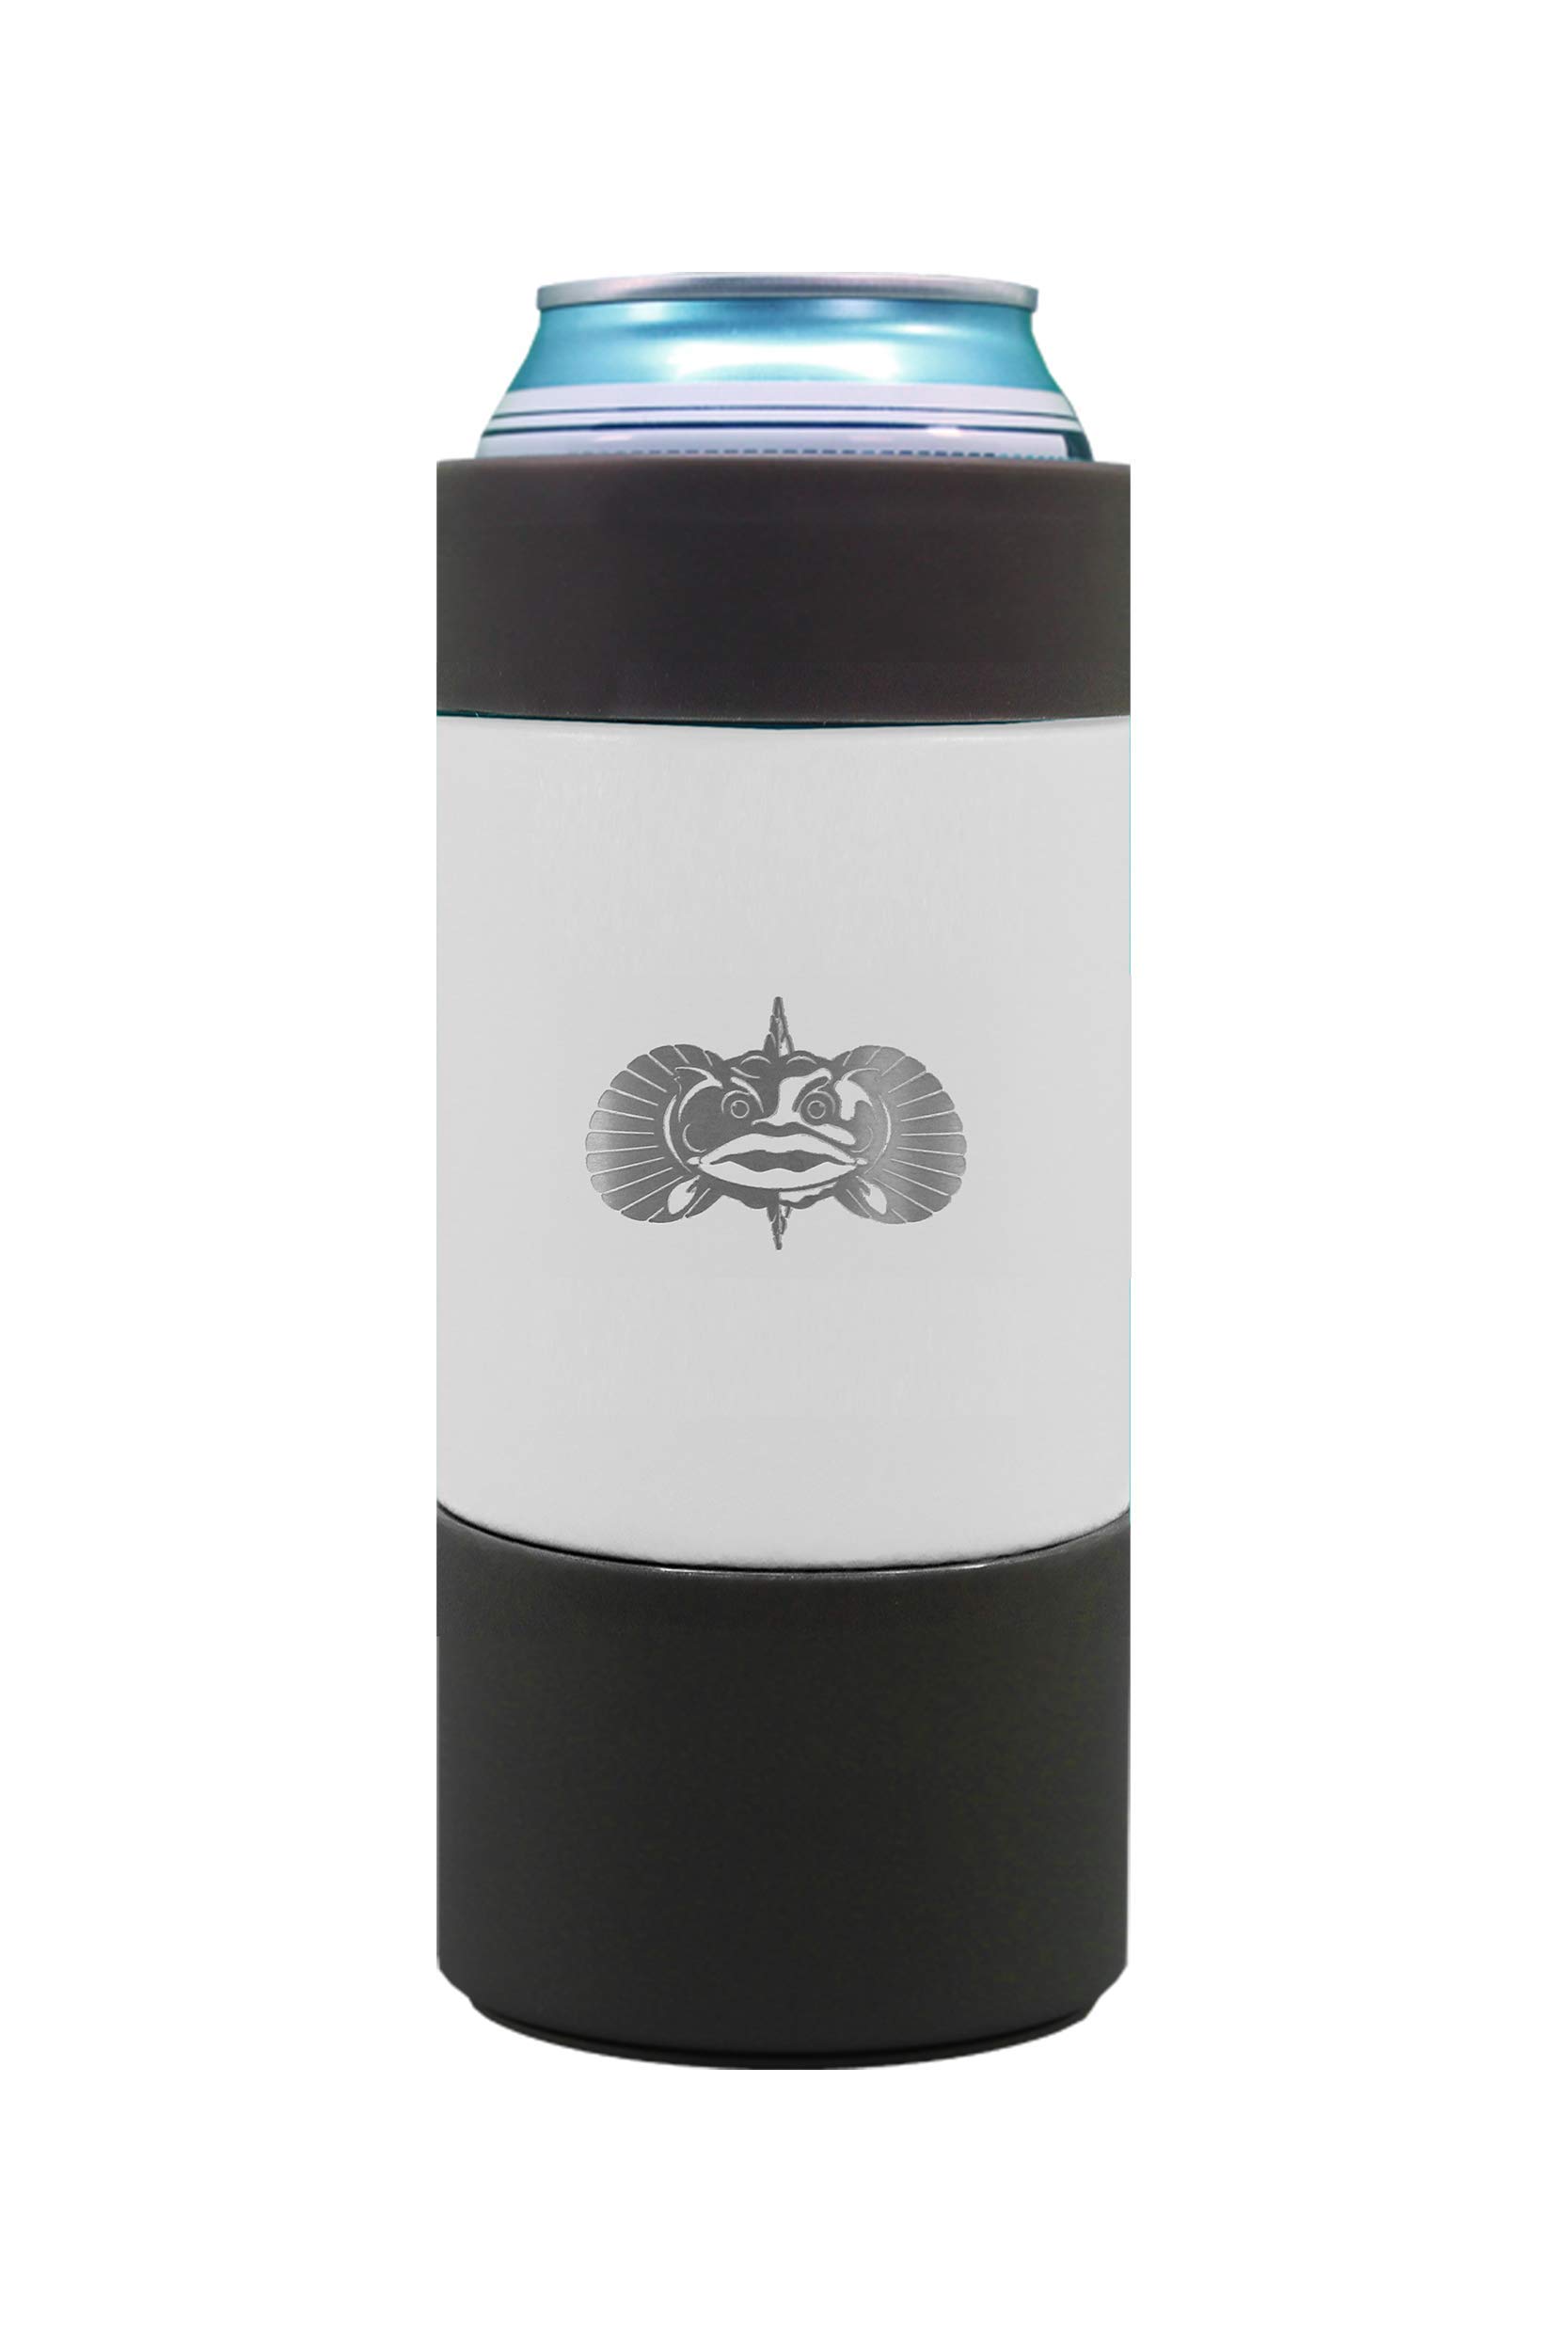 Toadfish Tall 16oz Can Cooler-Non-Tipping Suction Cup Can Cooler - (White)